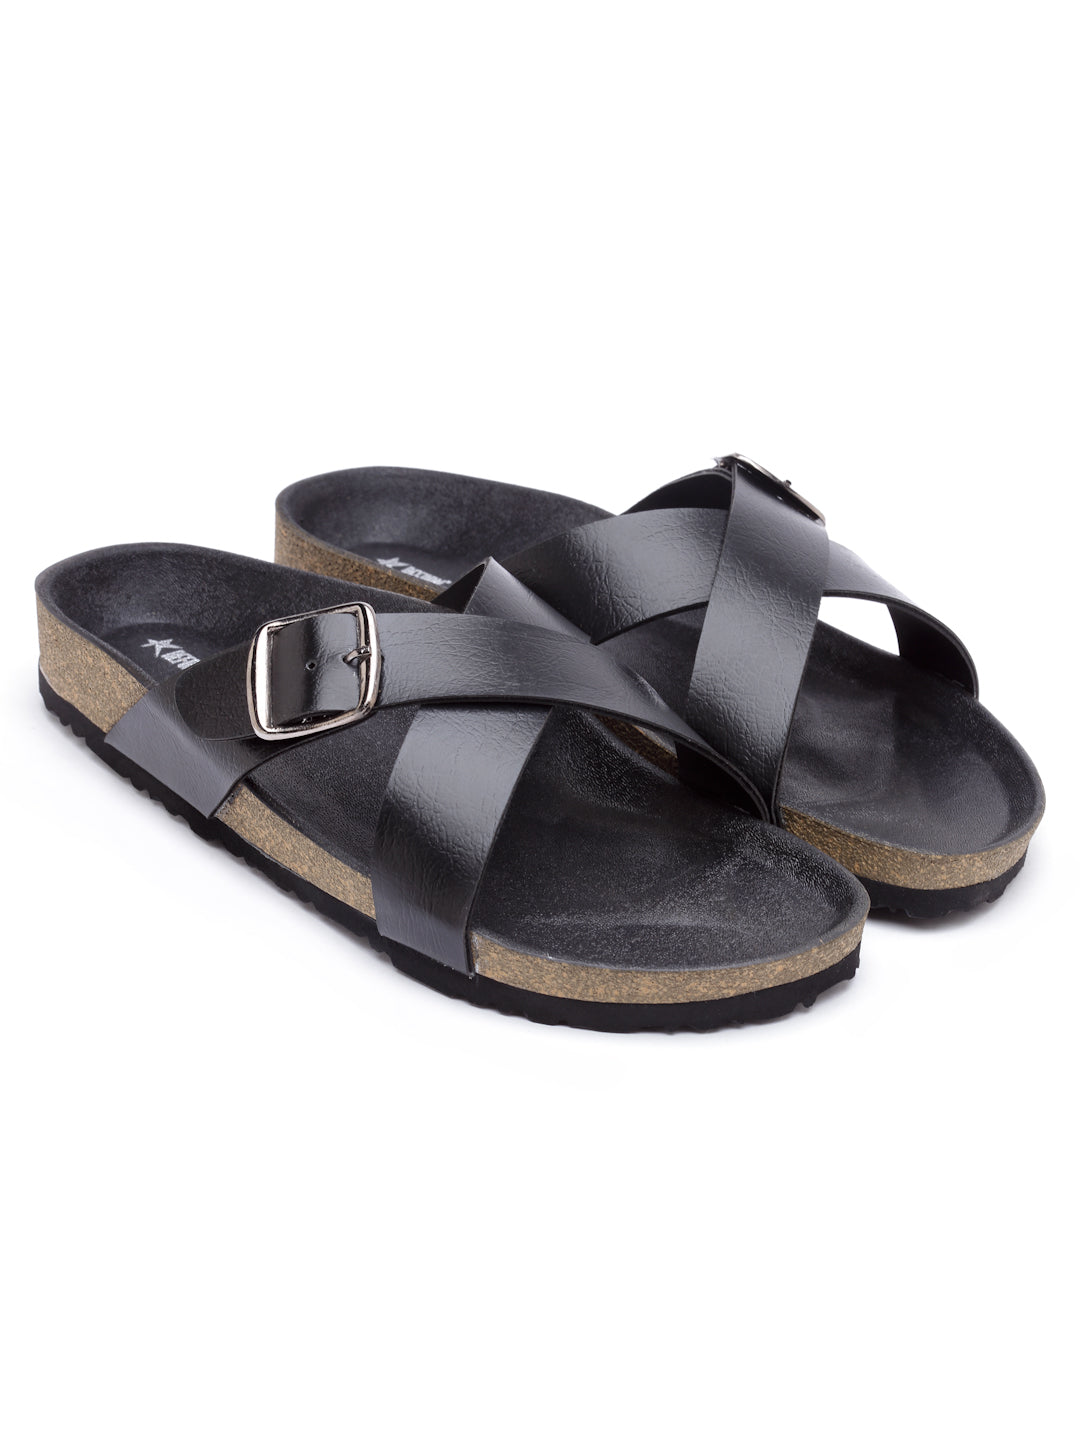 Women's Stylish Black Synthetic Leather Casual Sandal